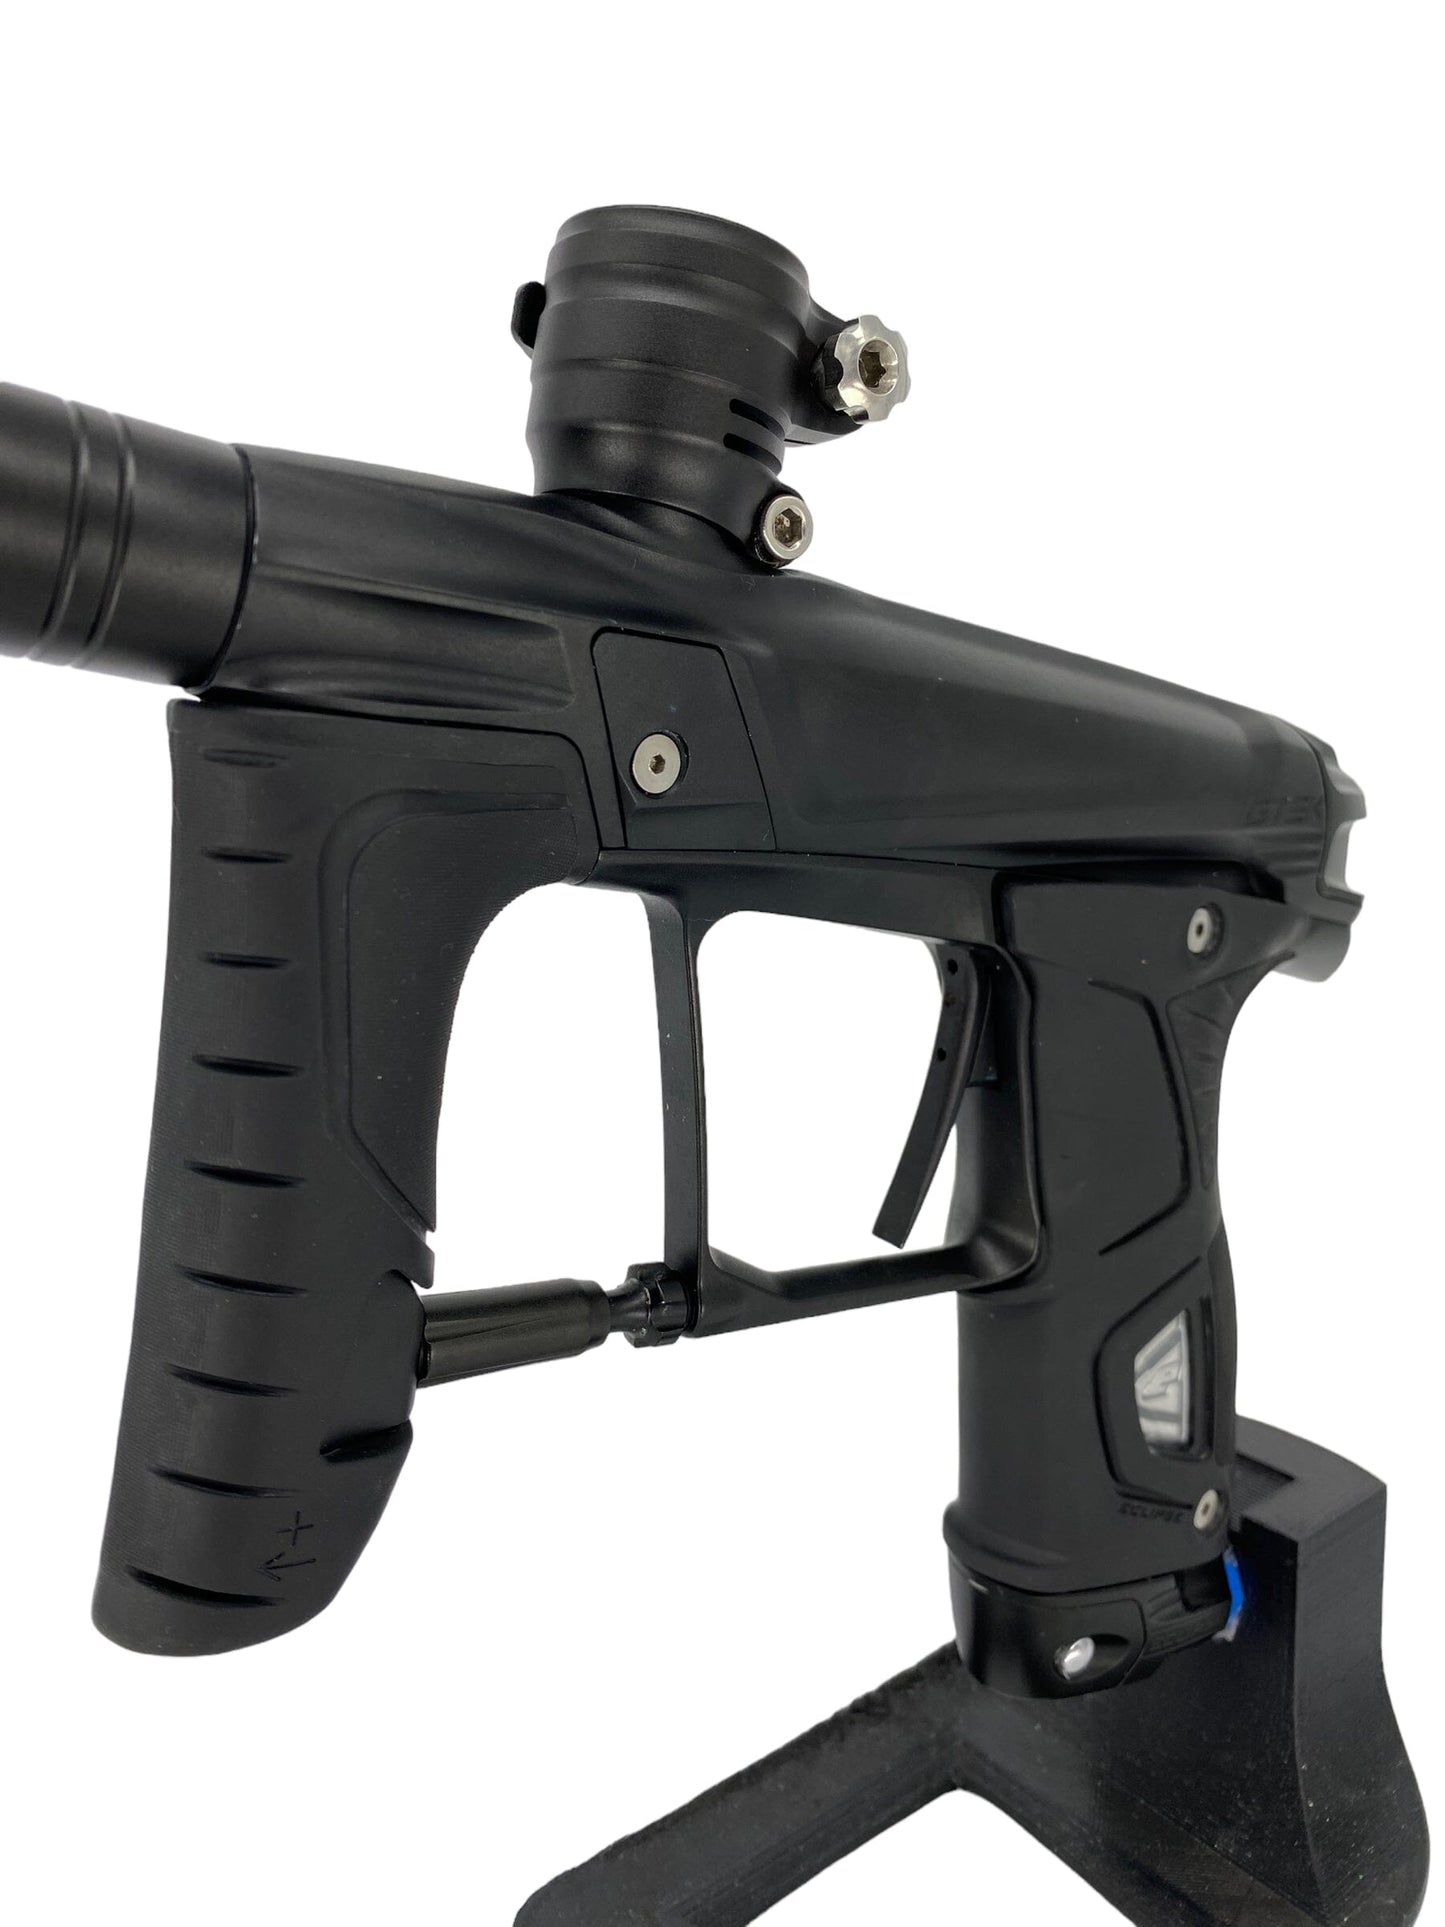 Used Planet Eclipse Gtek 160r Paintball Gun from CPXBrosPaintball Buy/Sell/Trade Paintball Markers, Paintball Hoppers, Paintball Masks, and Hormesis Headbands